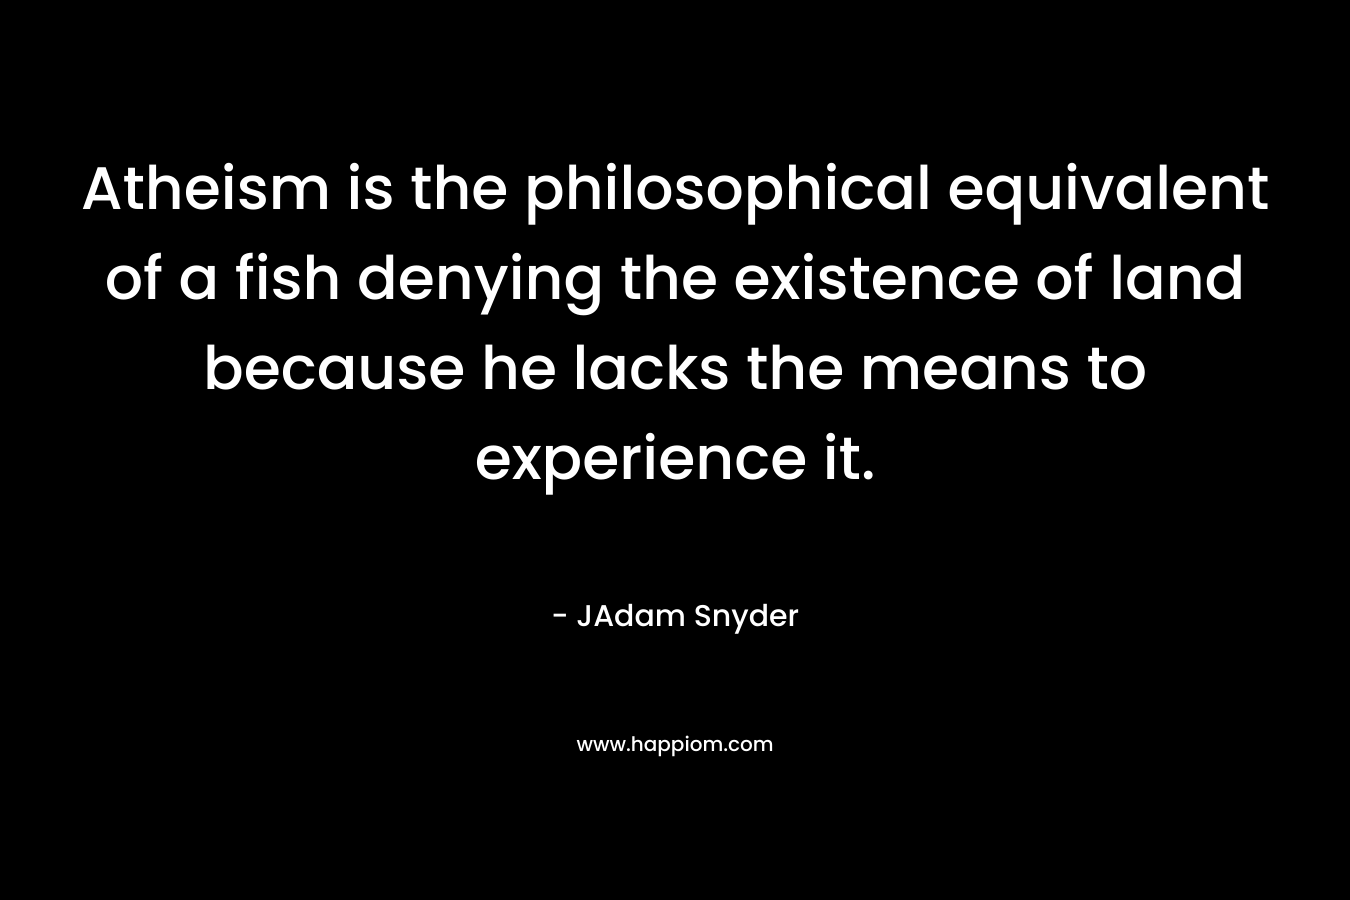 Atheism is the philosophical equivalent of a fish denying the existence of land because he lacks the means to experience it. – JAdam Snyder